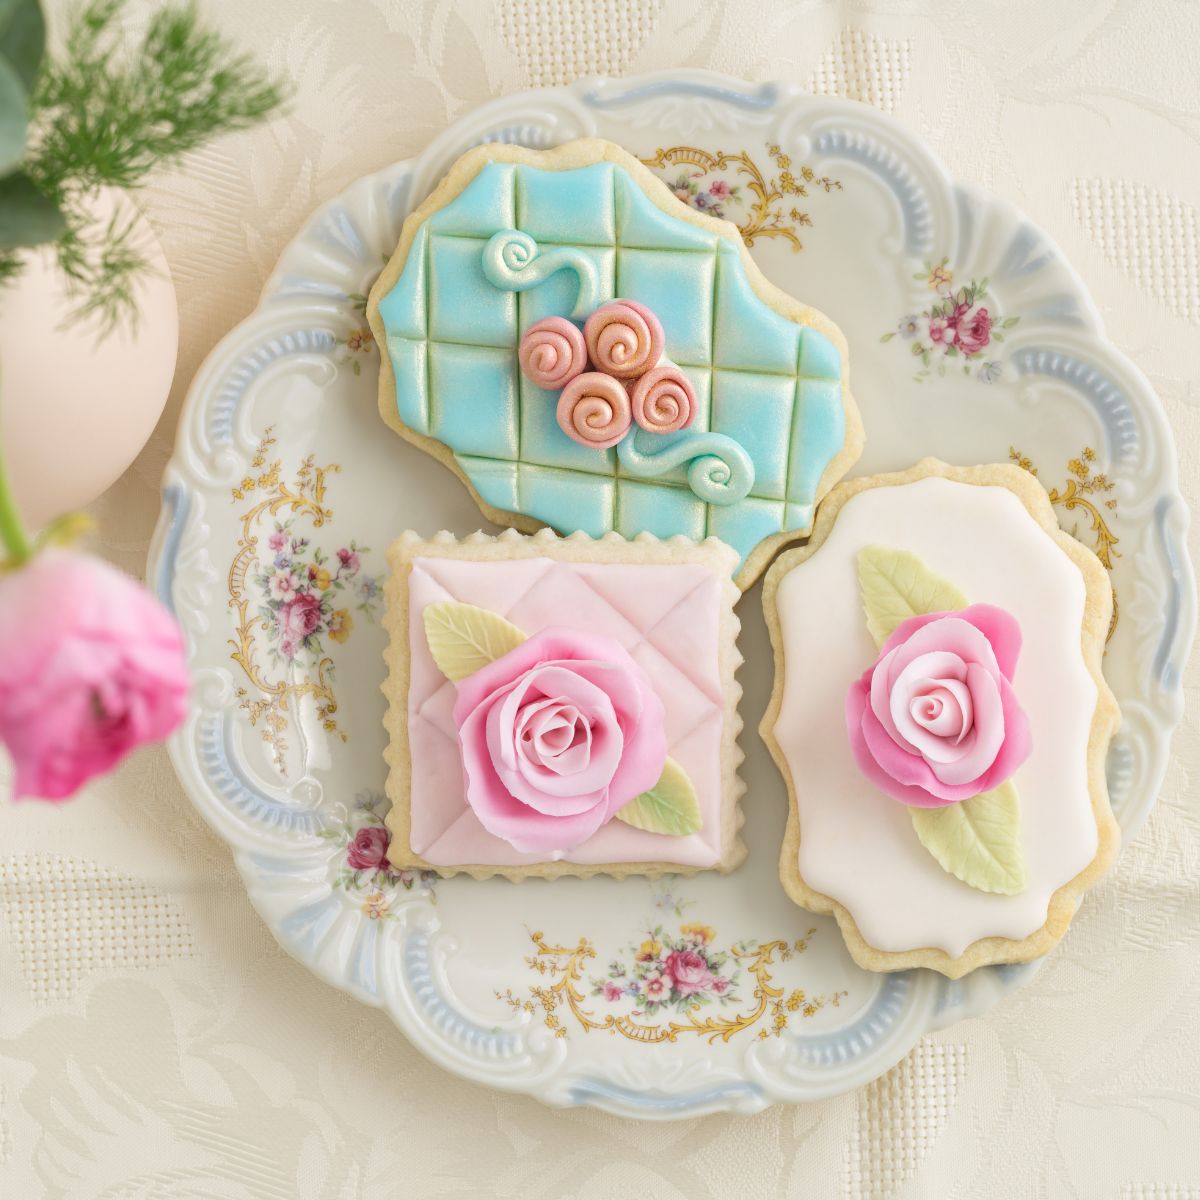 Beautifully decorated cookies in pastel colors on a pretty plate.